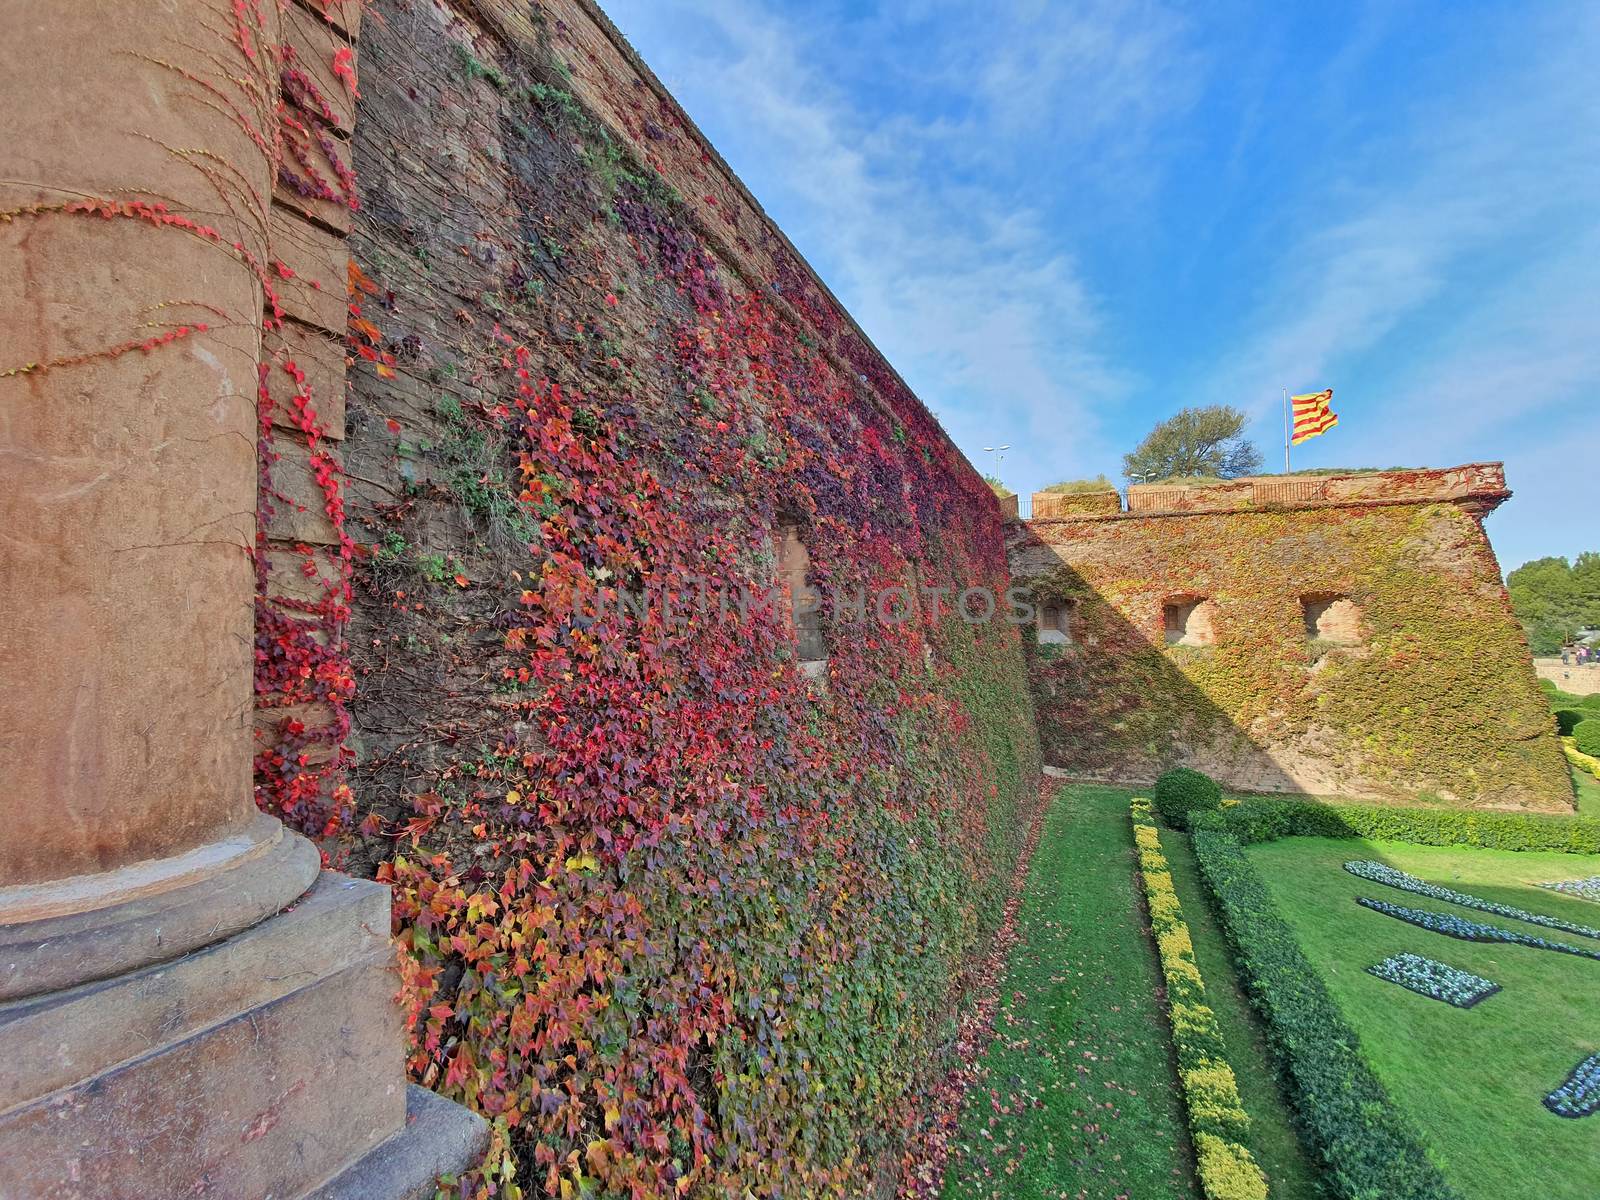 Green yard and ancient fortification, Montjuic Castle, well known landmark in Barcelona.